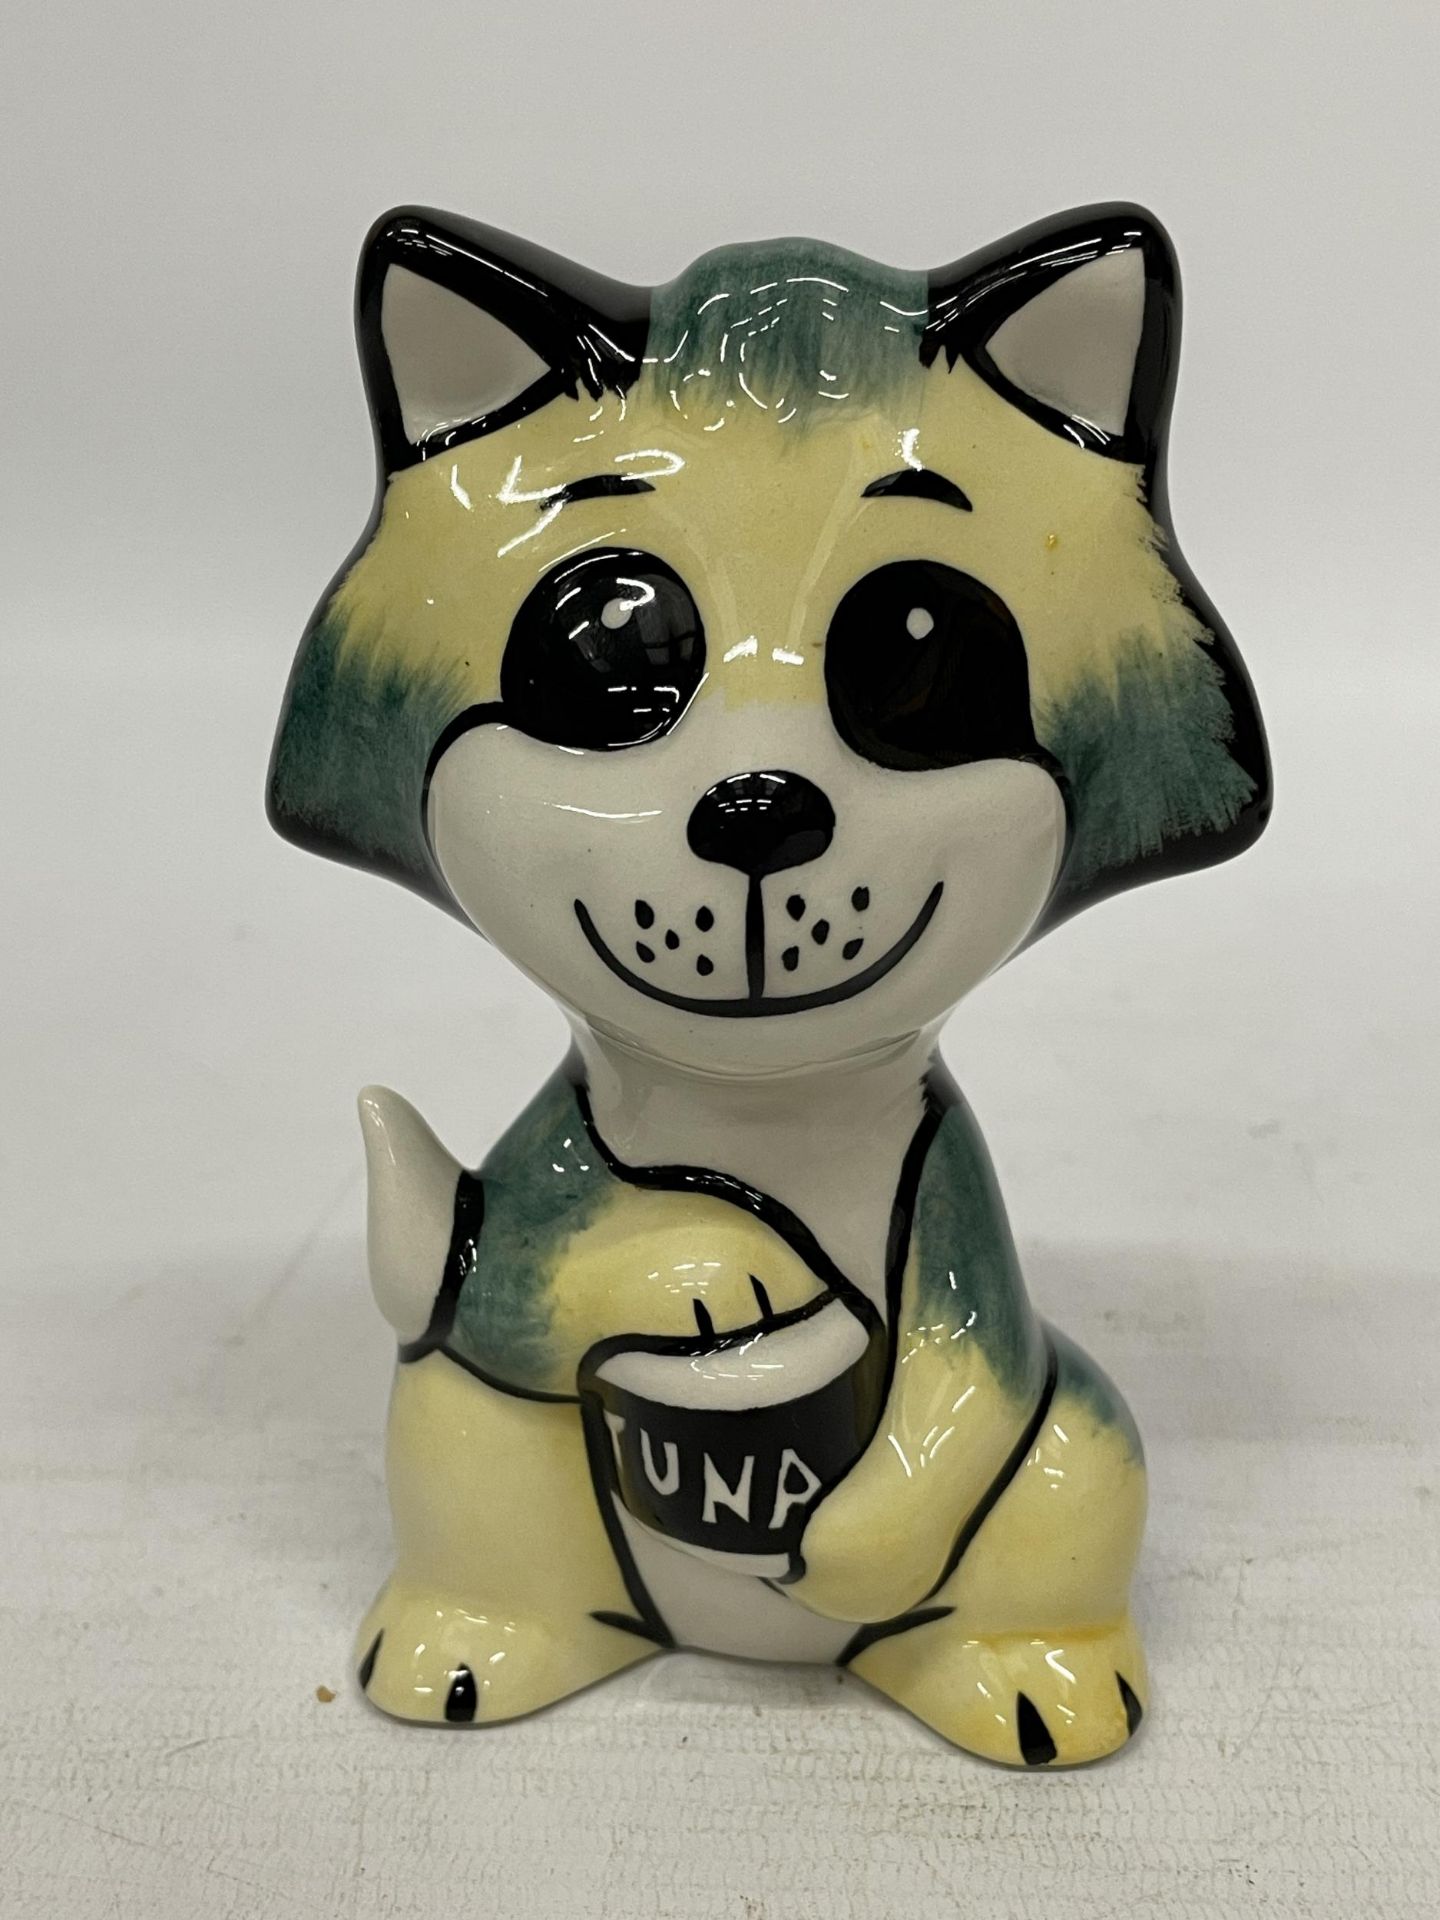 A LORNA BAILEY HAND PAINTED AND SIGNED CAT -TUNA